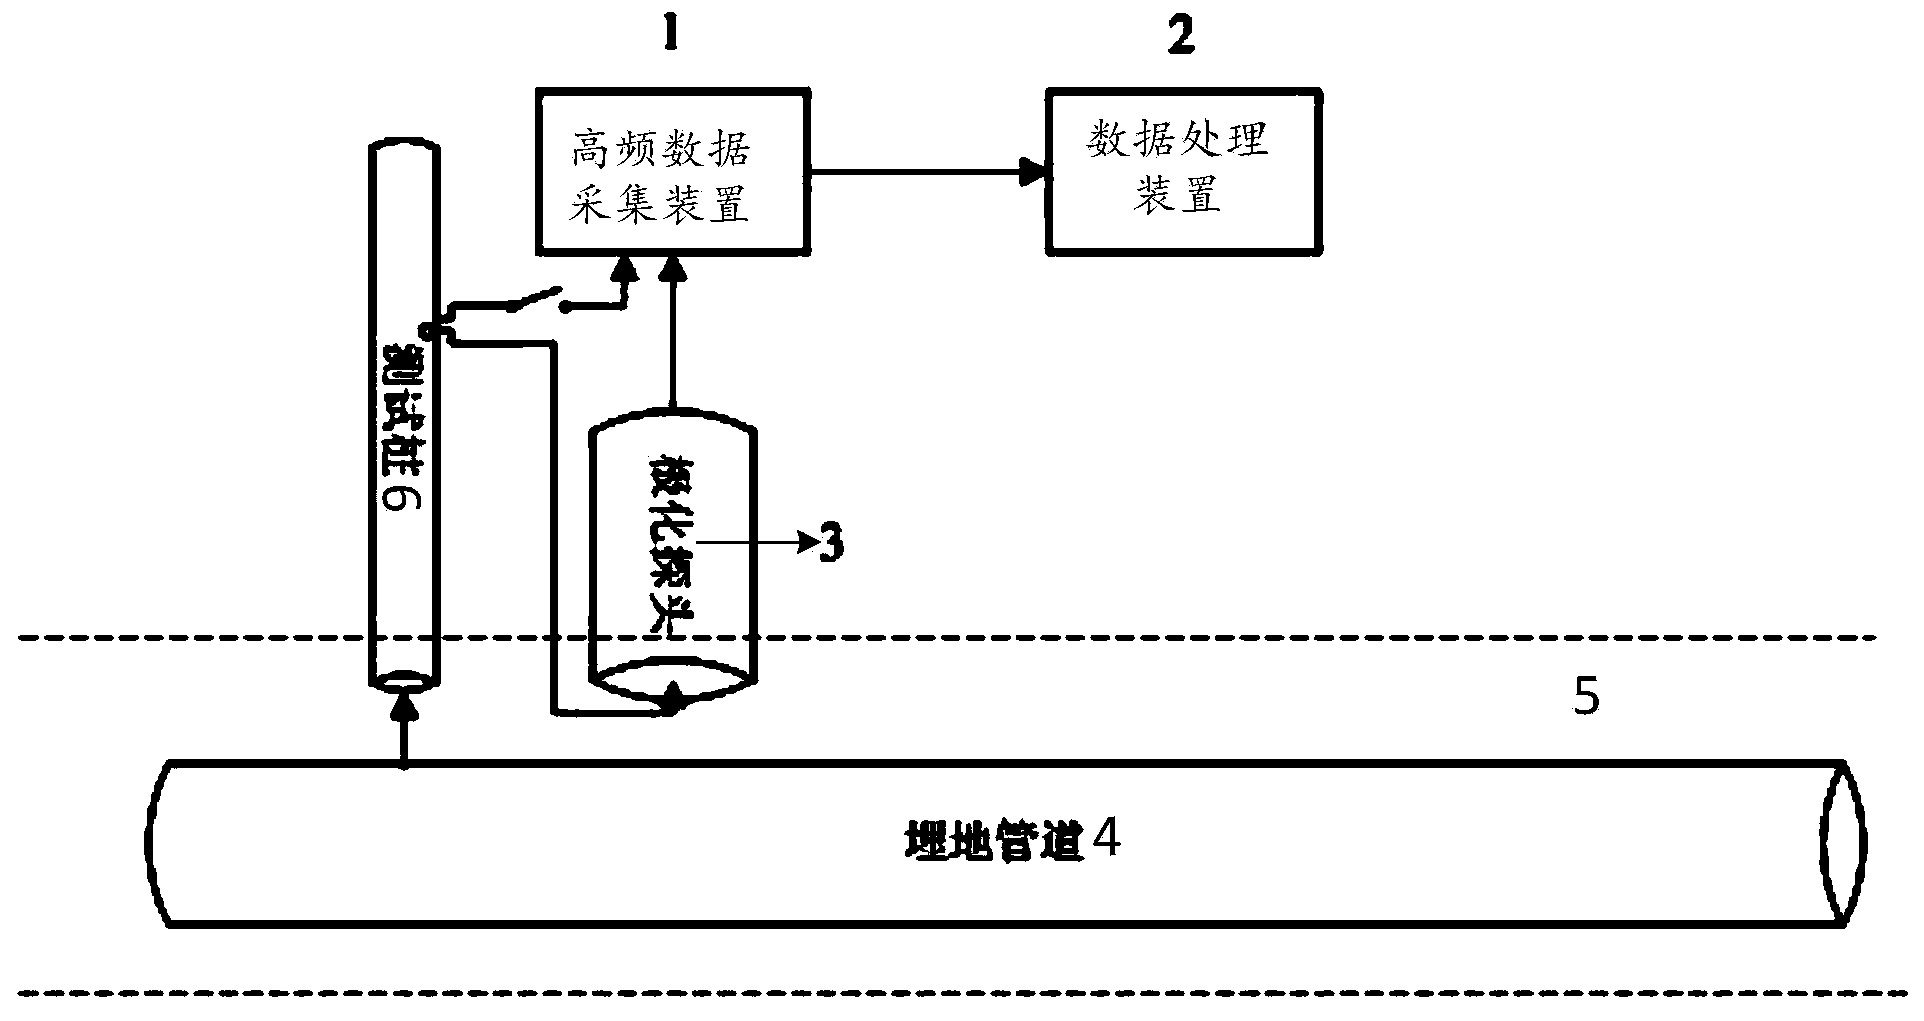 Dynamic interference potential test system for buried pipeline